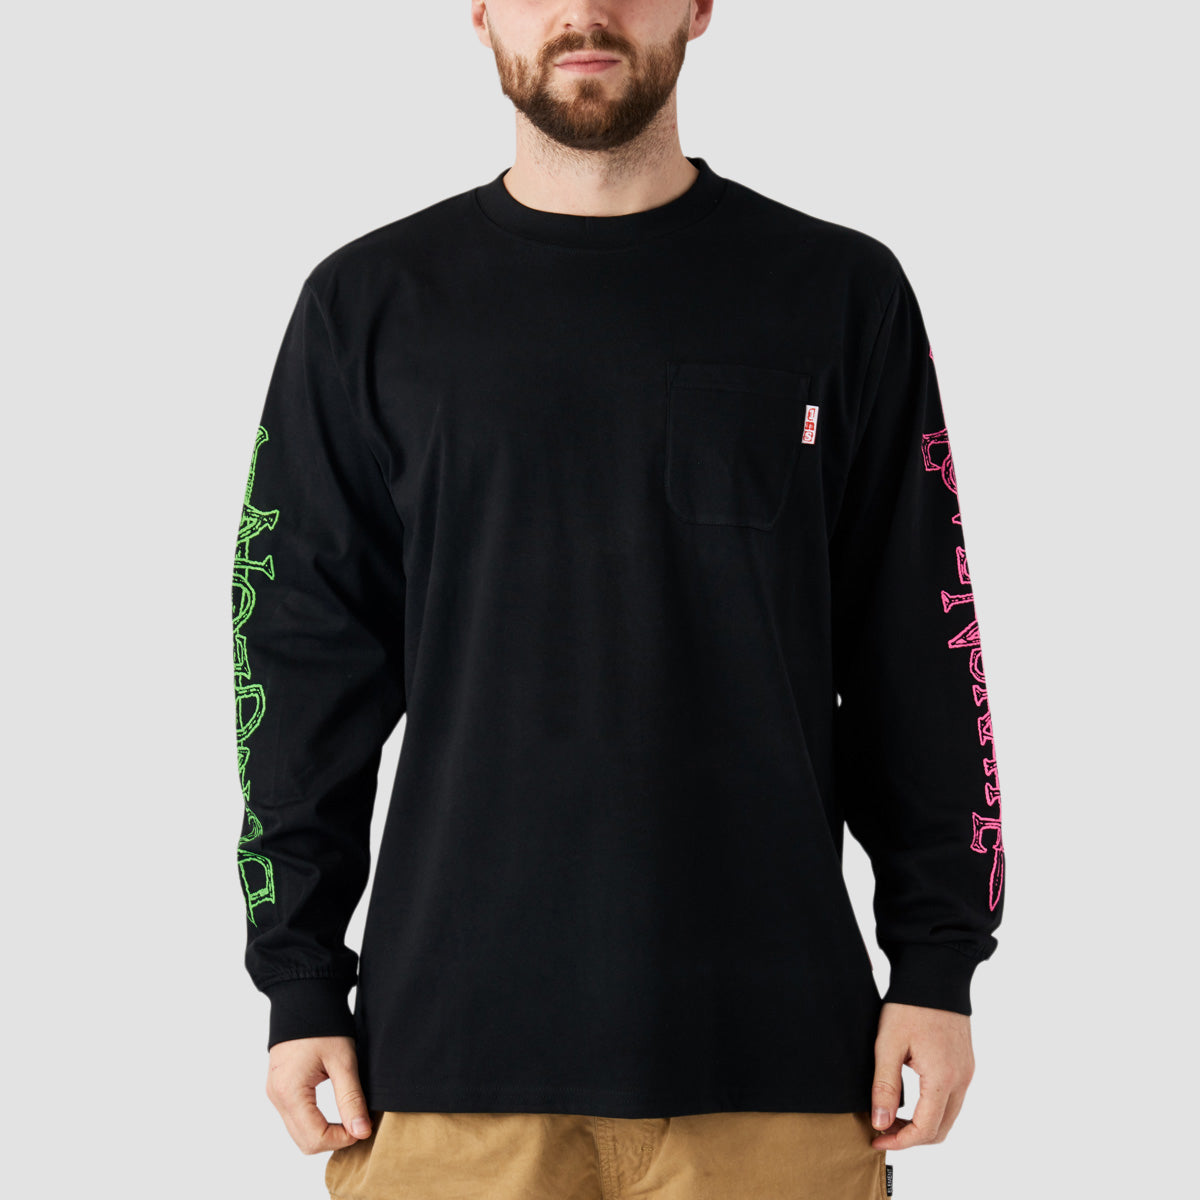 Lovenskate X Dungeon By French Longsleeve T-Shirt Black